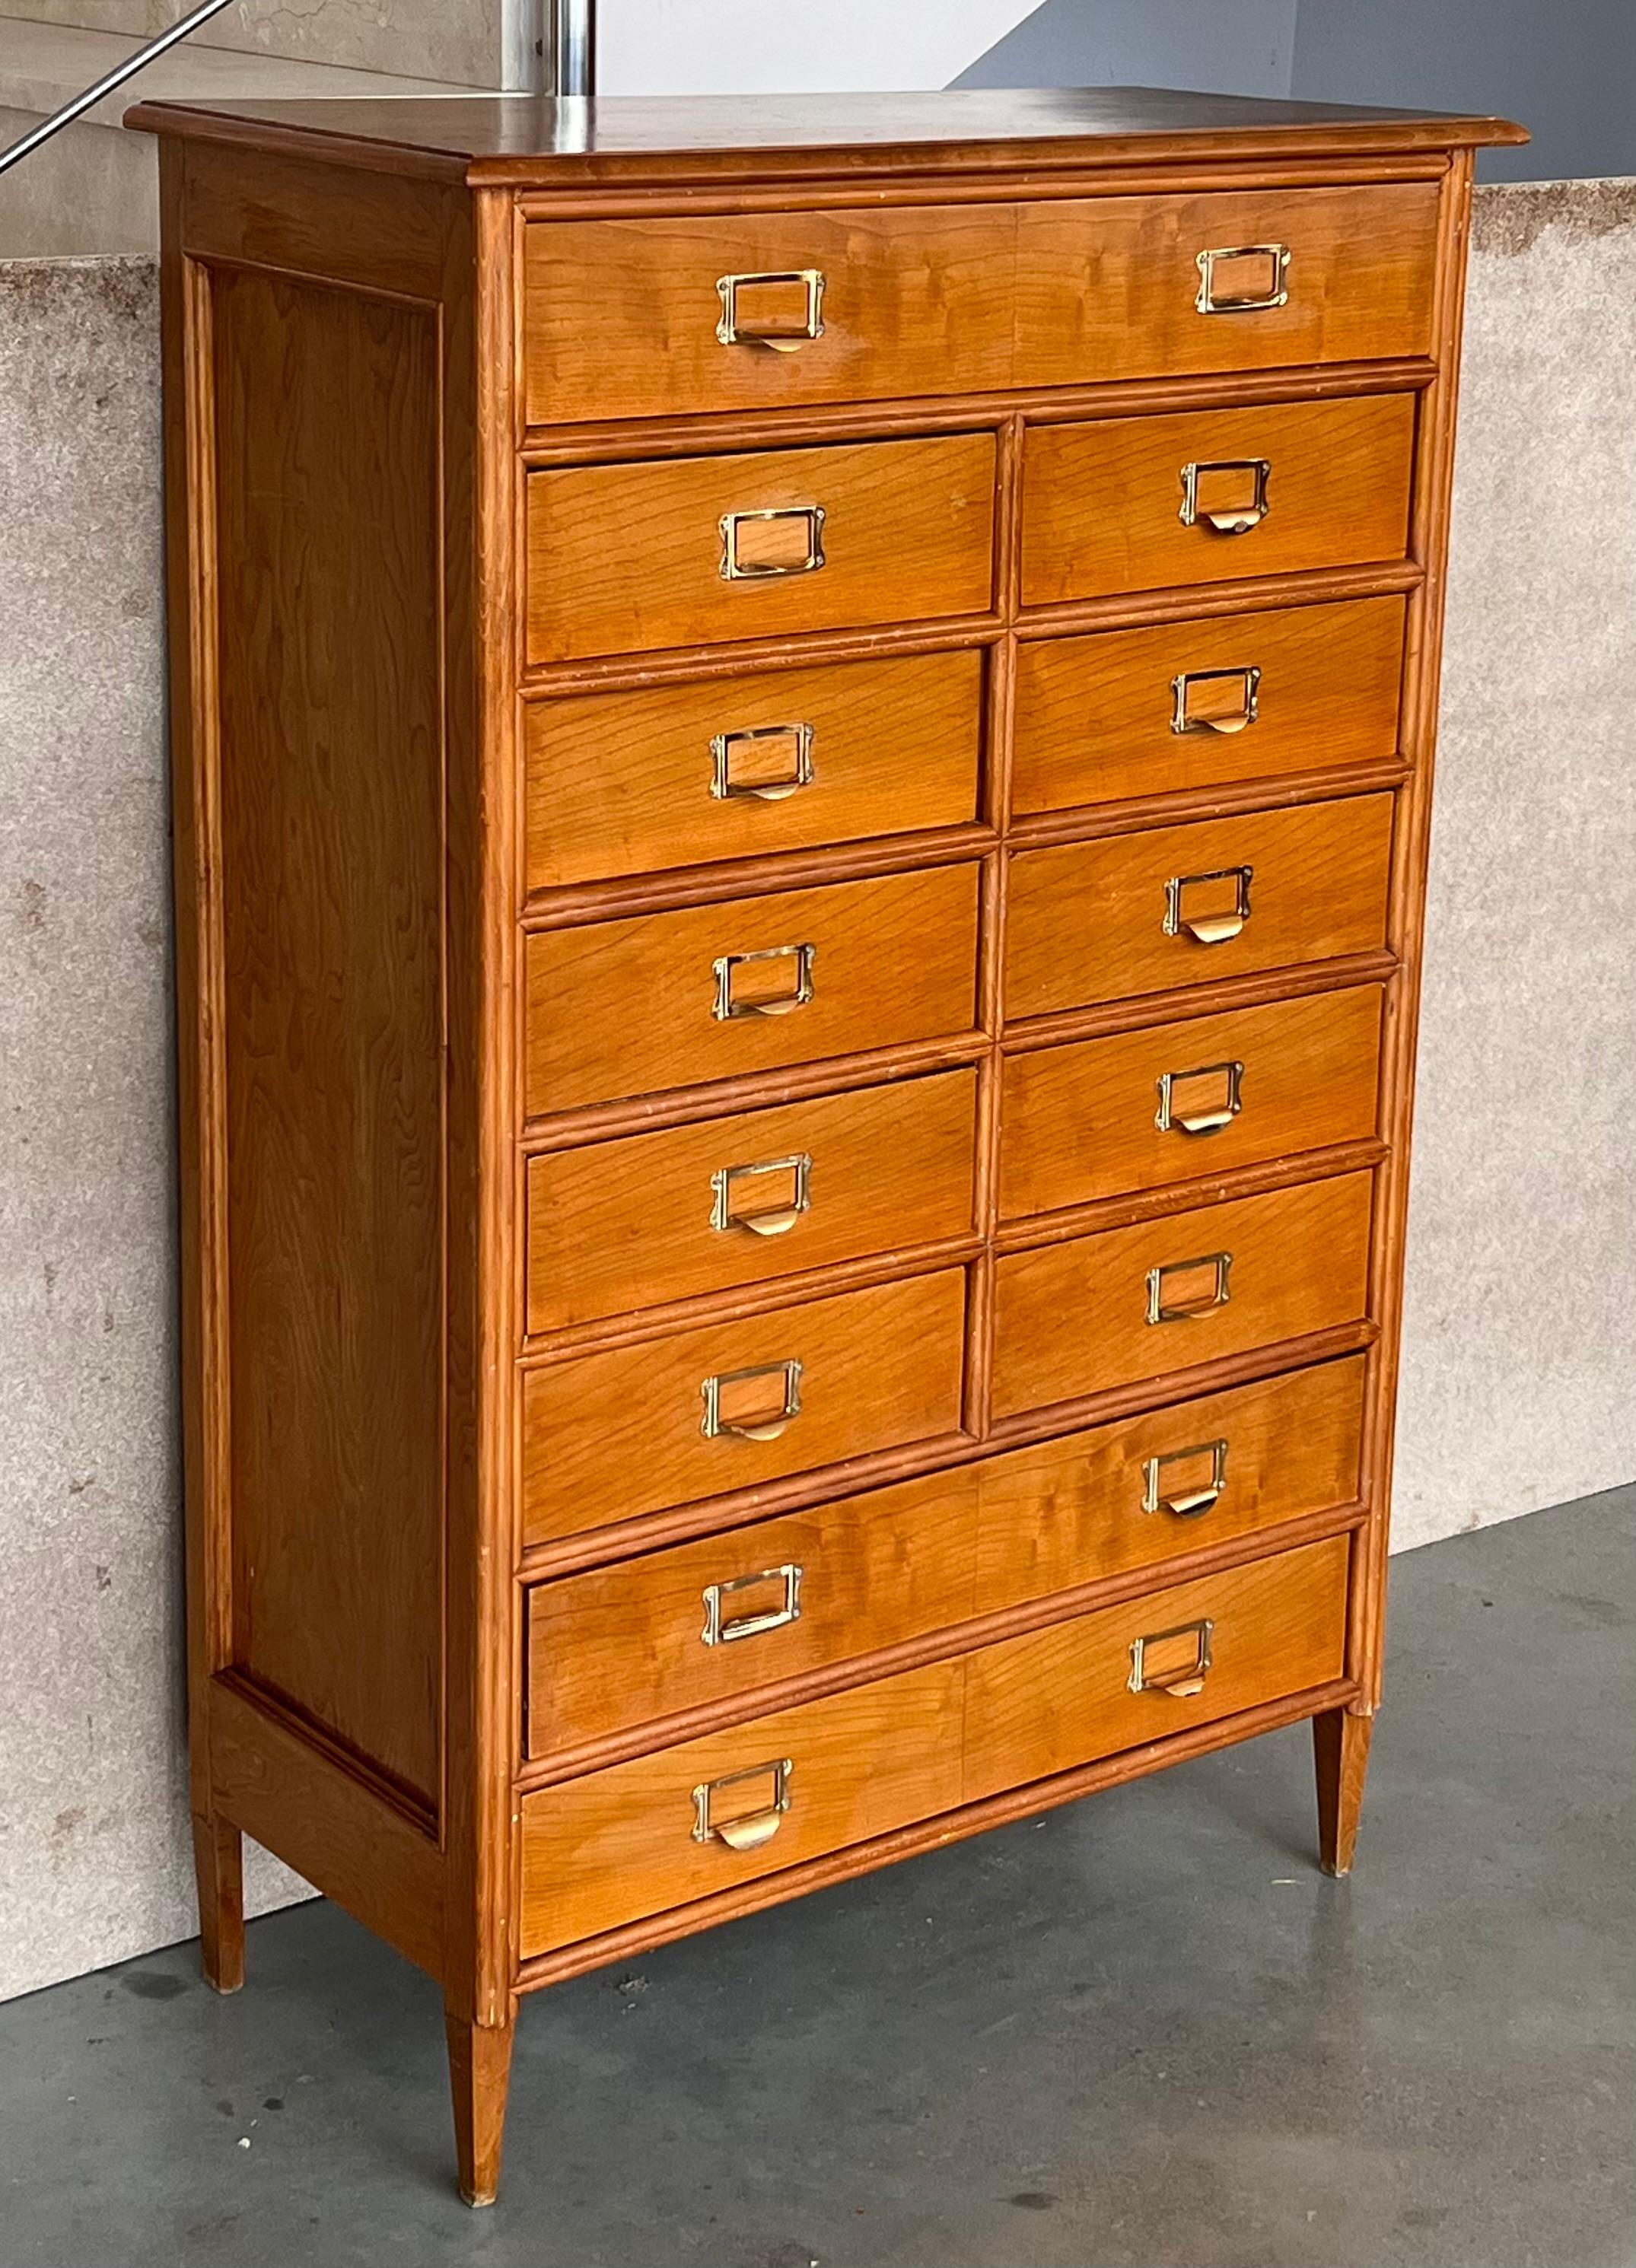 20th Century Tall Vintage Tall Teak Wood Campaign Highboy Chest in Style of Bernhardt For Sale